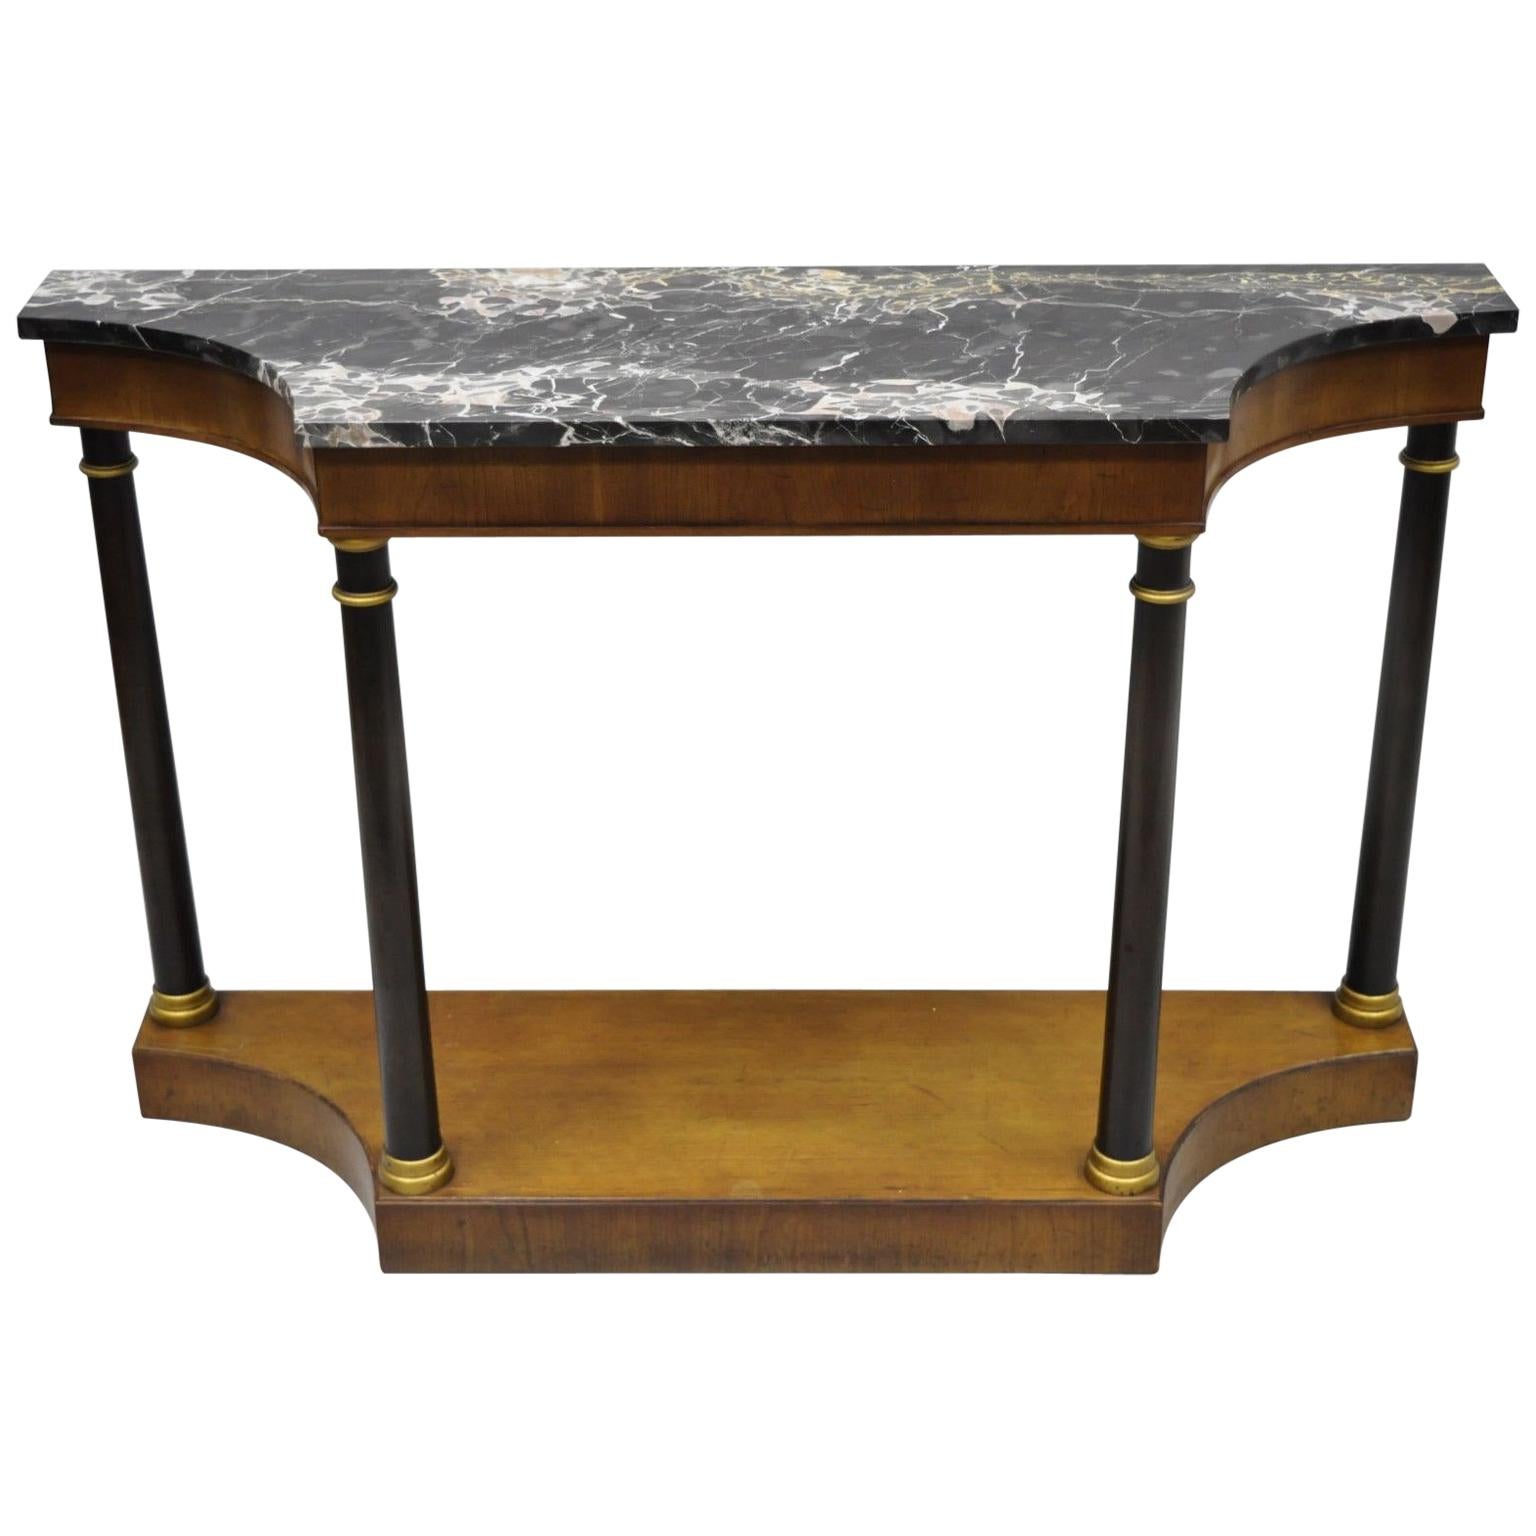 French Empire Style Marble Top Console Hall Table with Columns by Fine Arts Furn